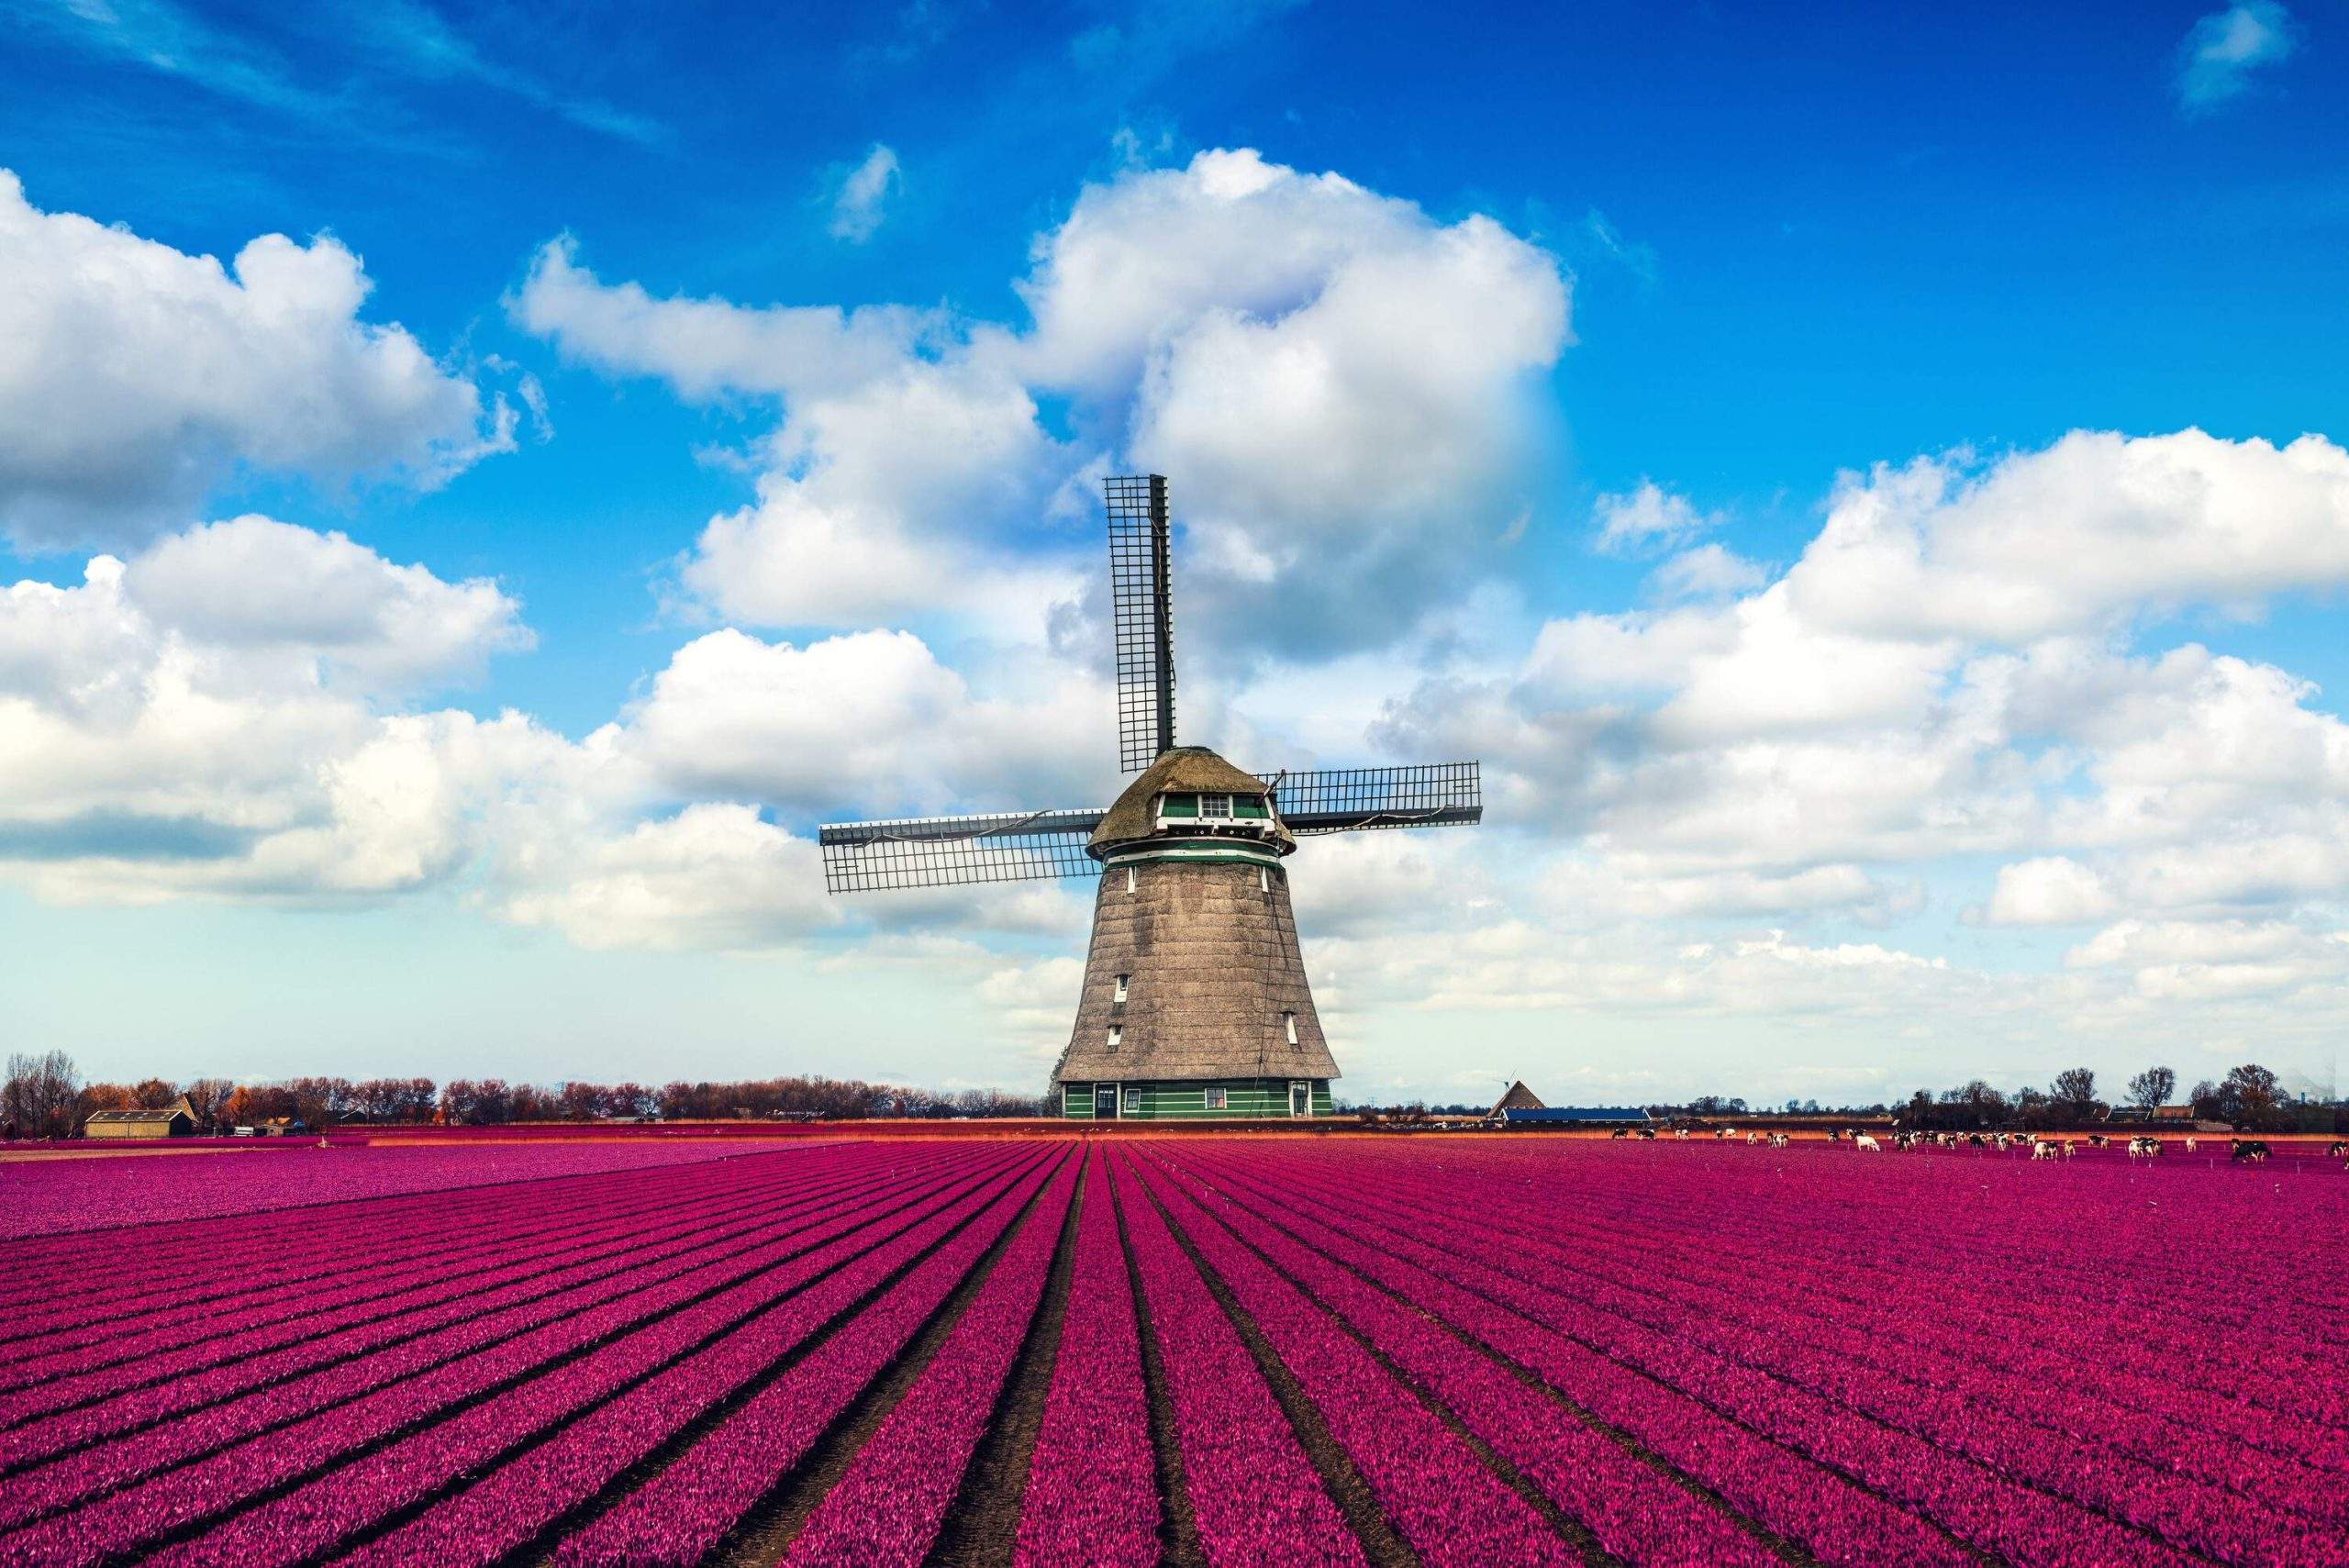 dest_netherlands_theme_tulips_windmill_gettyimages-521975241_universal_within-usage-period_29361-scaled-1.jpg